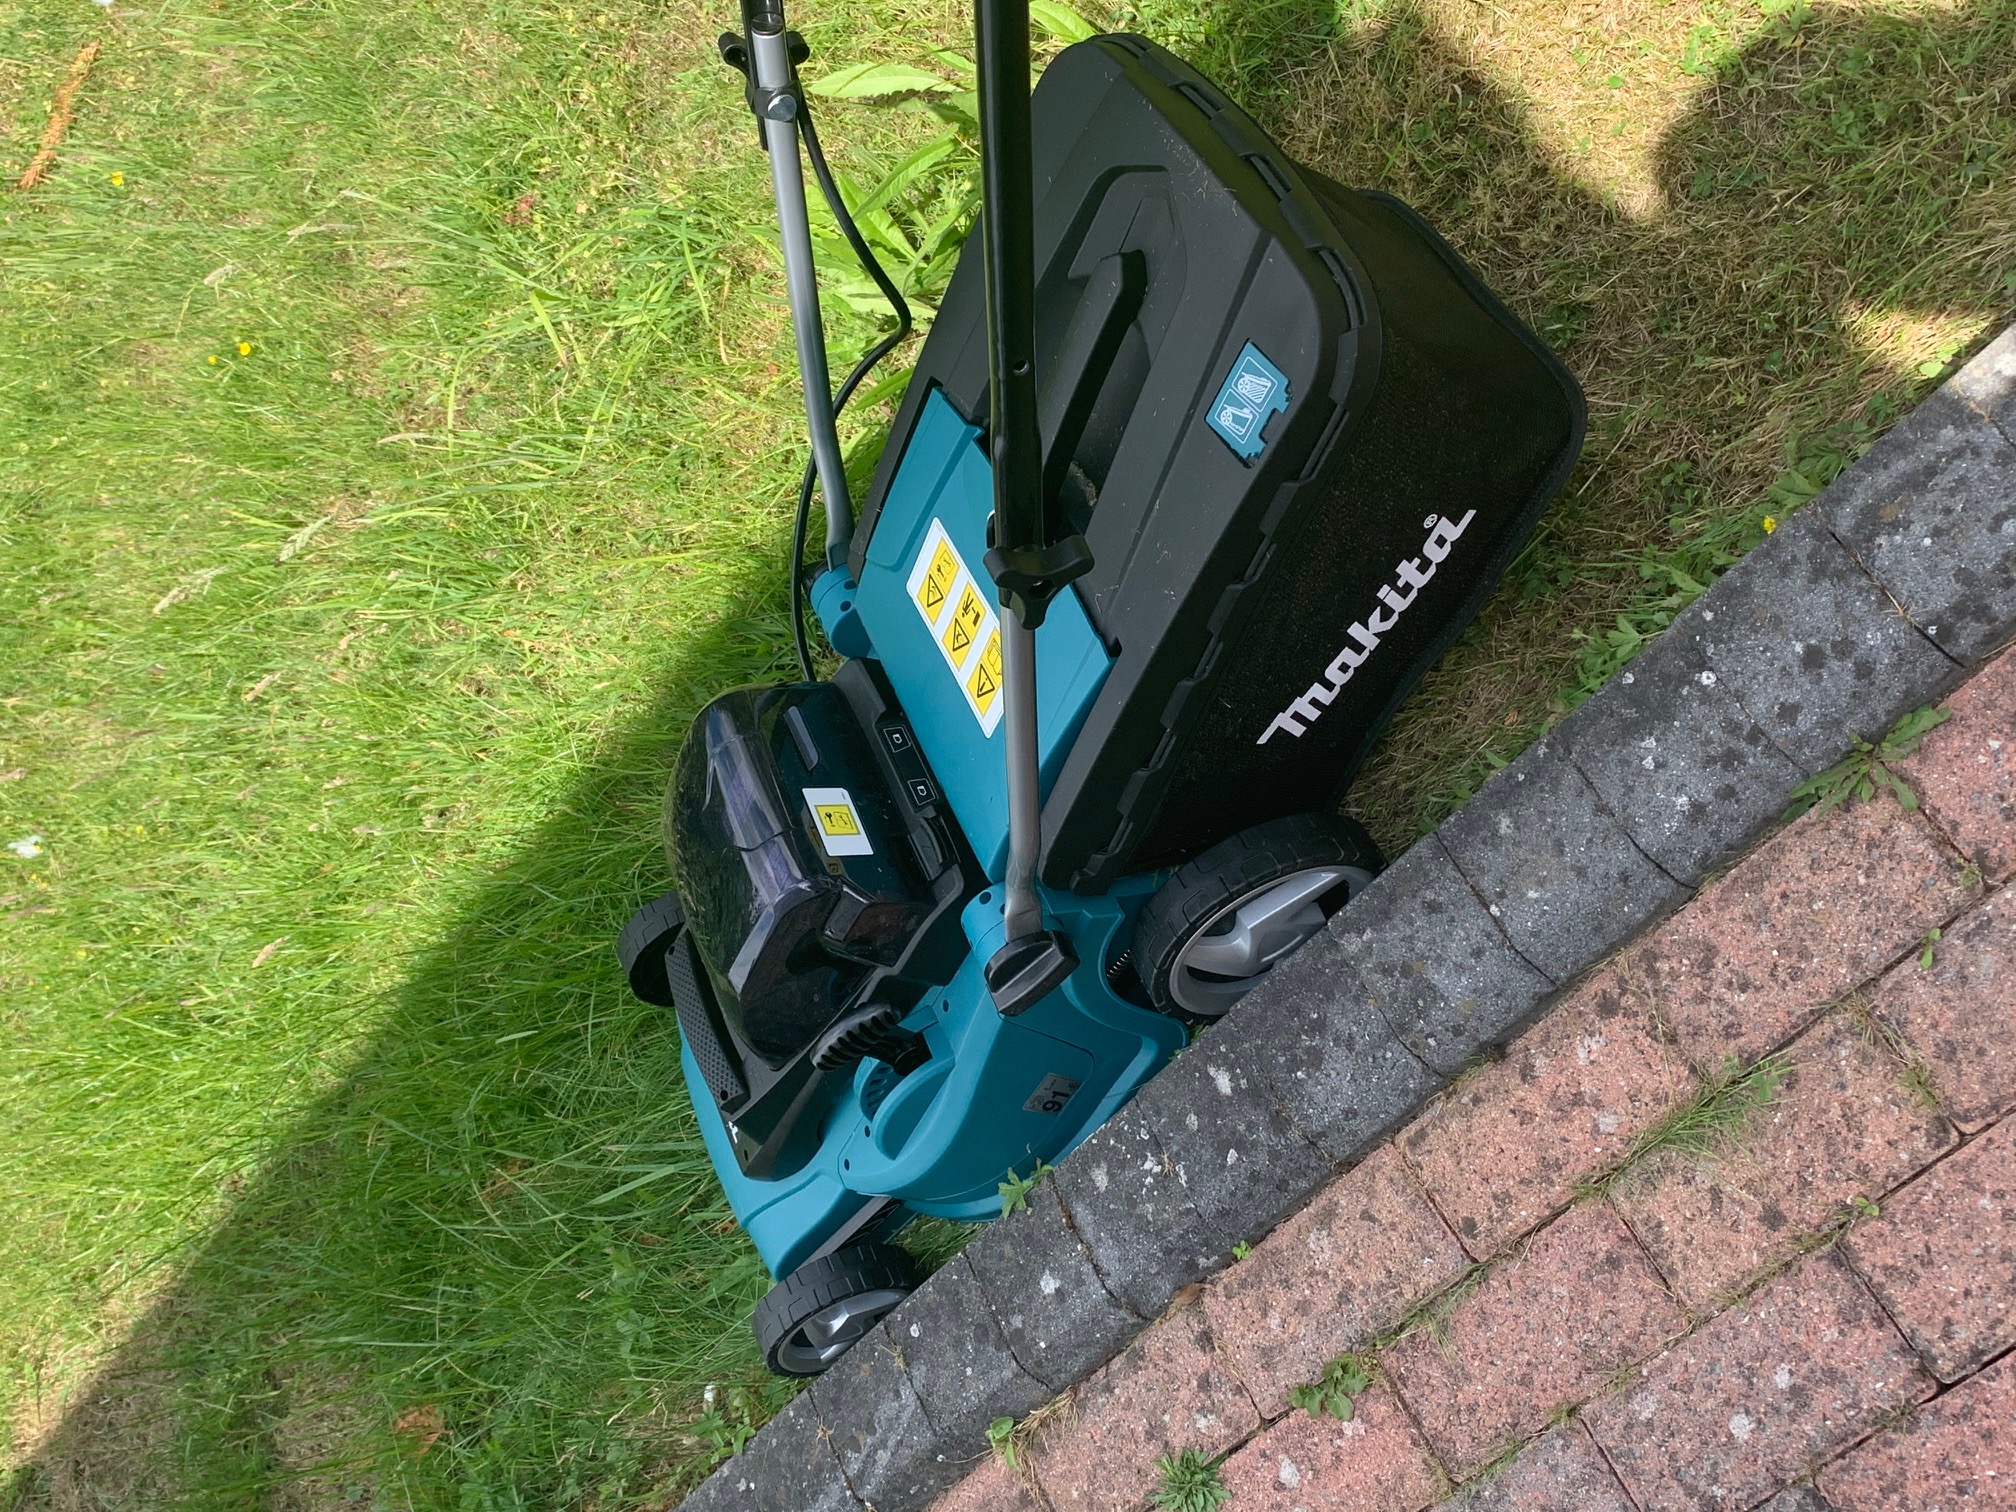 UK's best lawn mowers TESTED: Makita, Flymo, Hyundai, and McCulloch for value and cut quality. » Shetland's Garden Tool Box